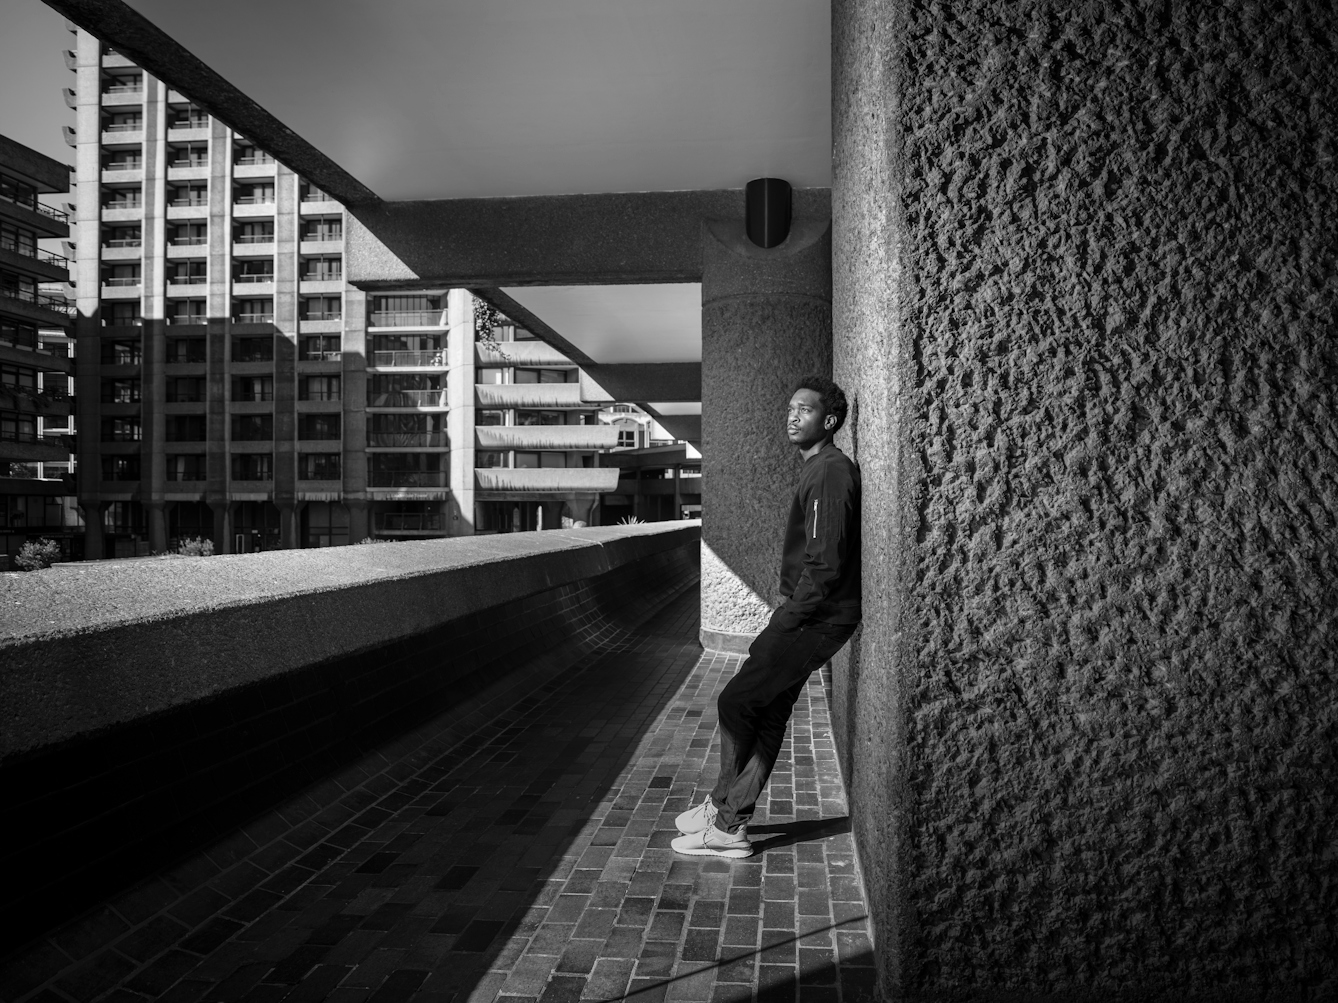 Photograph in black and white of a man standing in a walkway, looking out at the Barbican Centre, London.